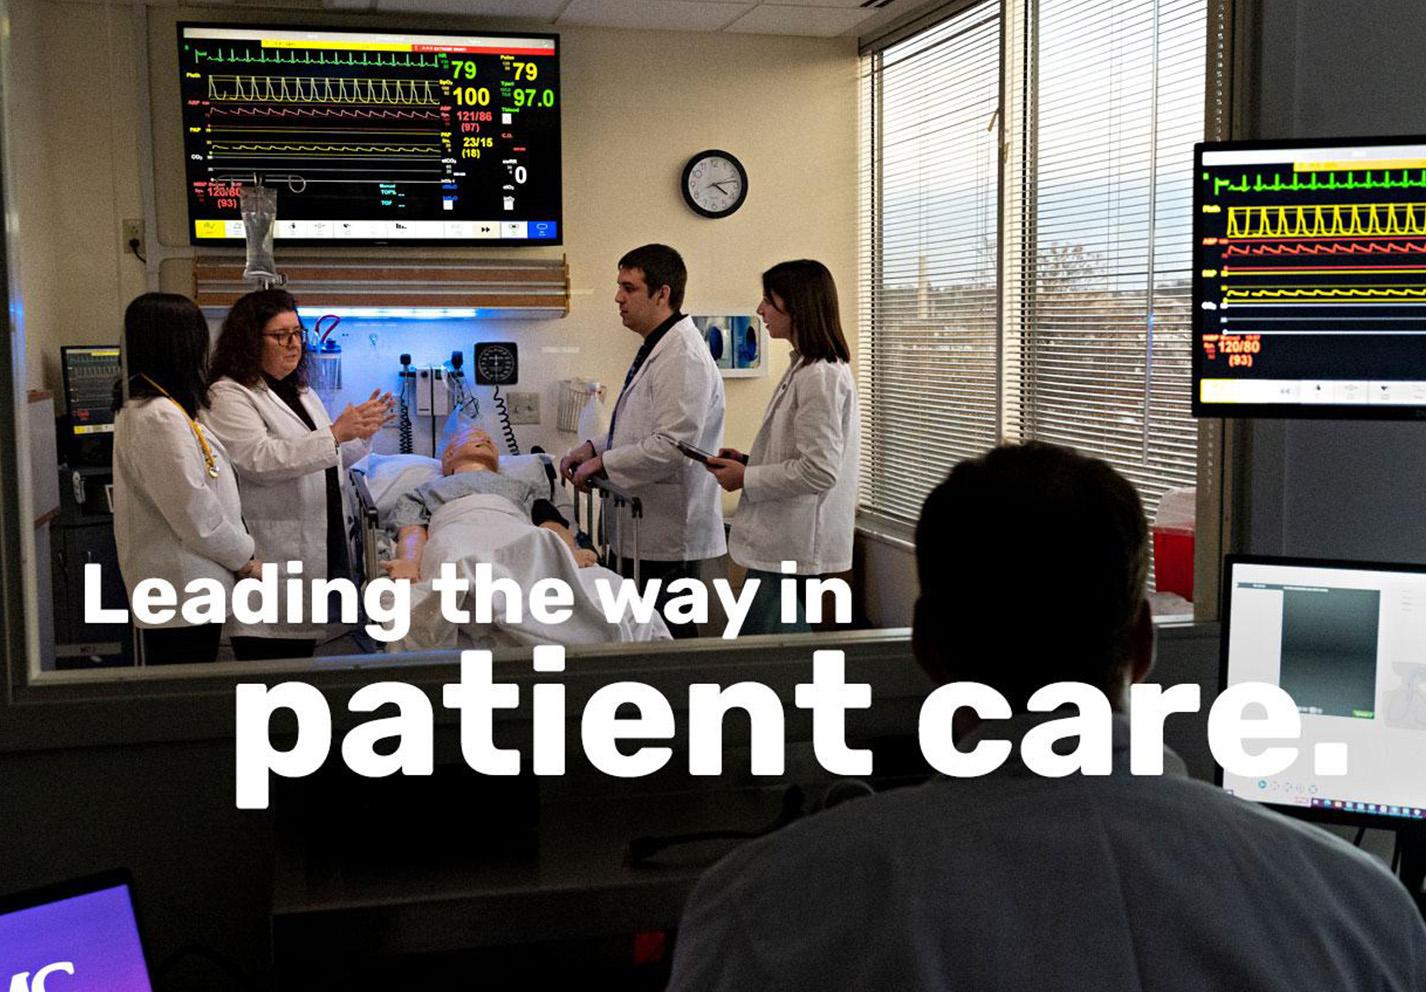 Leading the way in patient care.